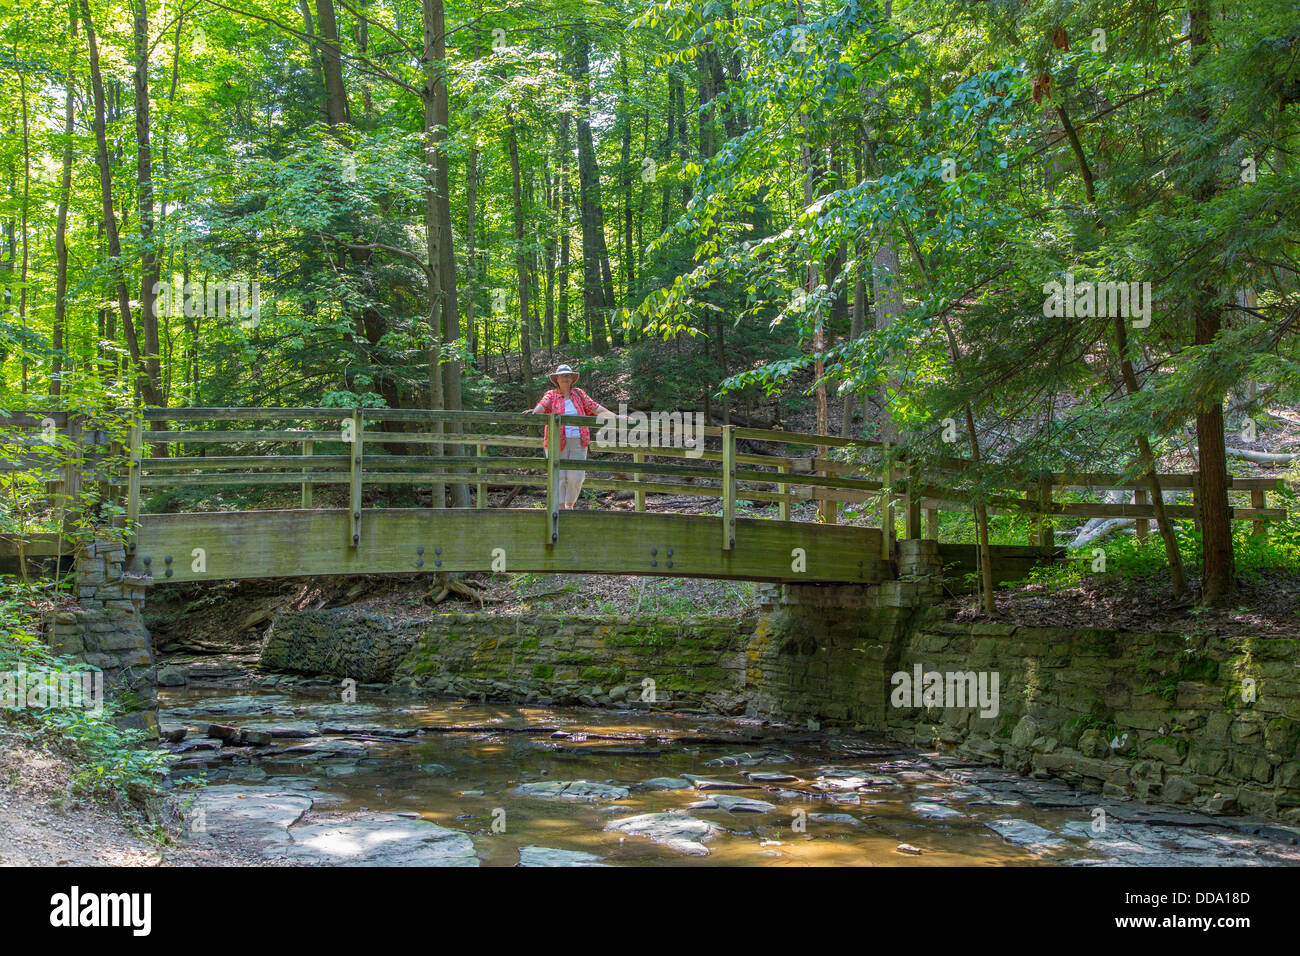 Wooden foot bridge over creek in Cuyahoga Valley National Park in Ohio United States Stock Photo